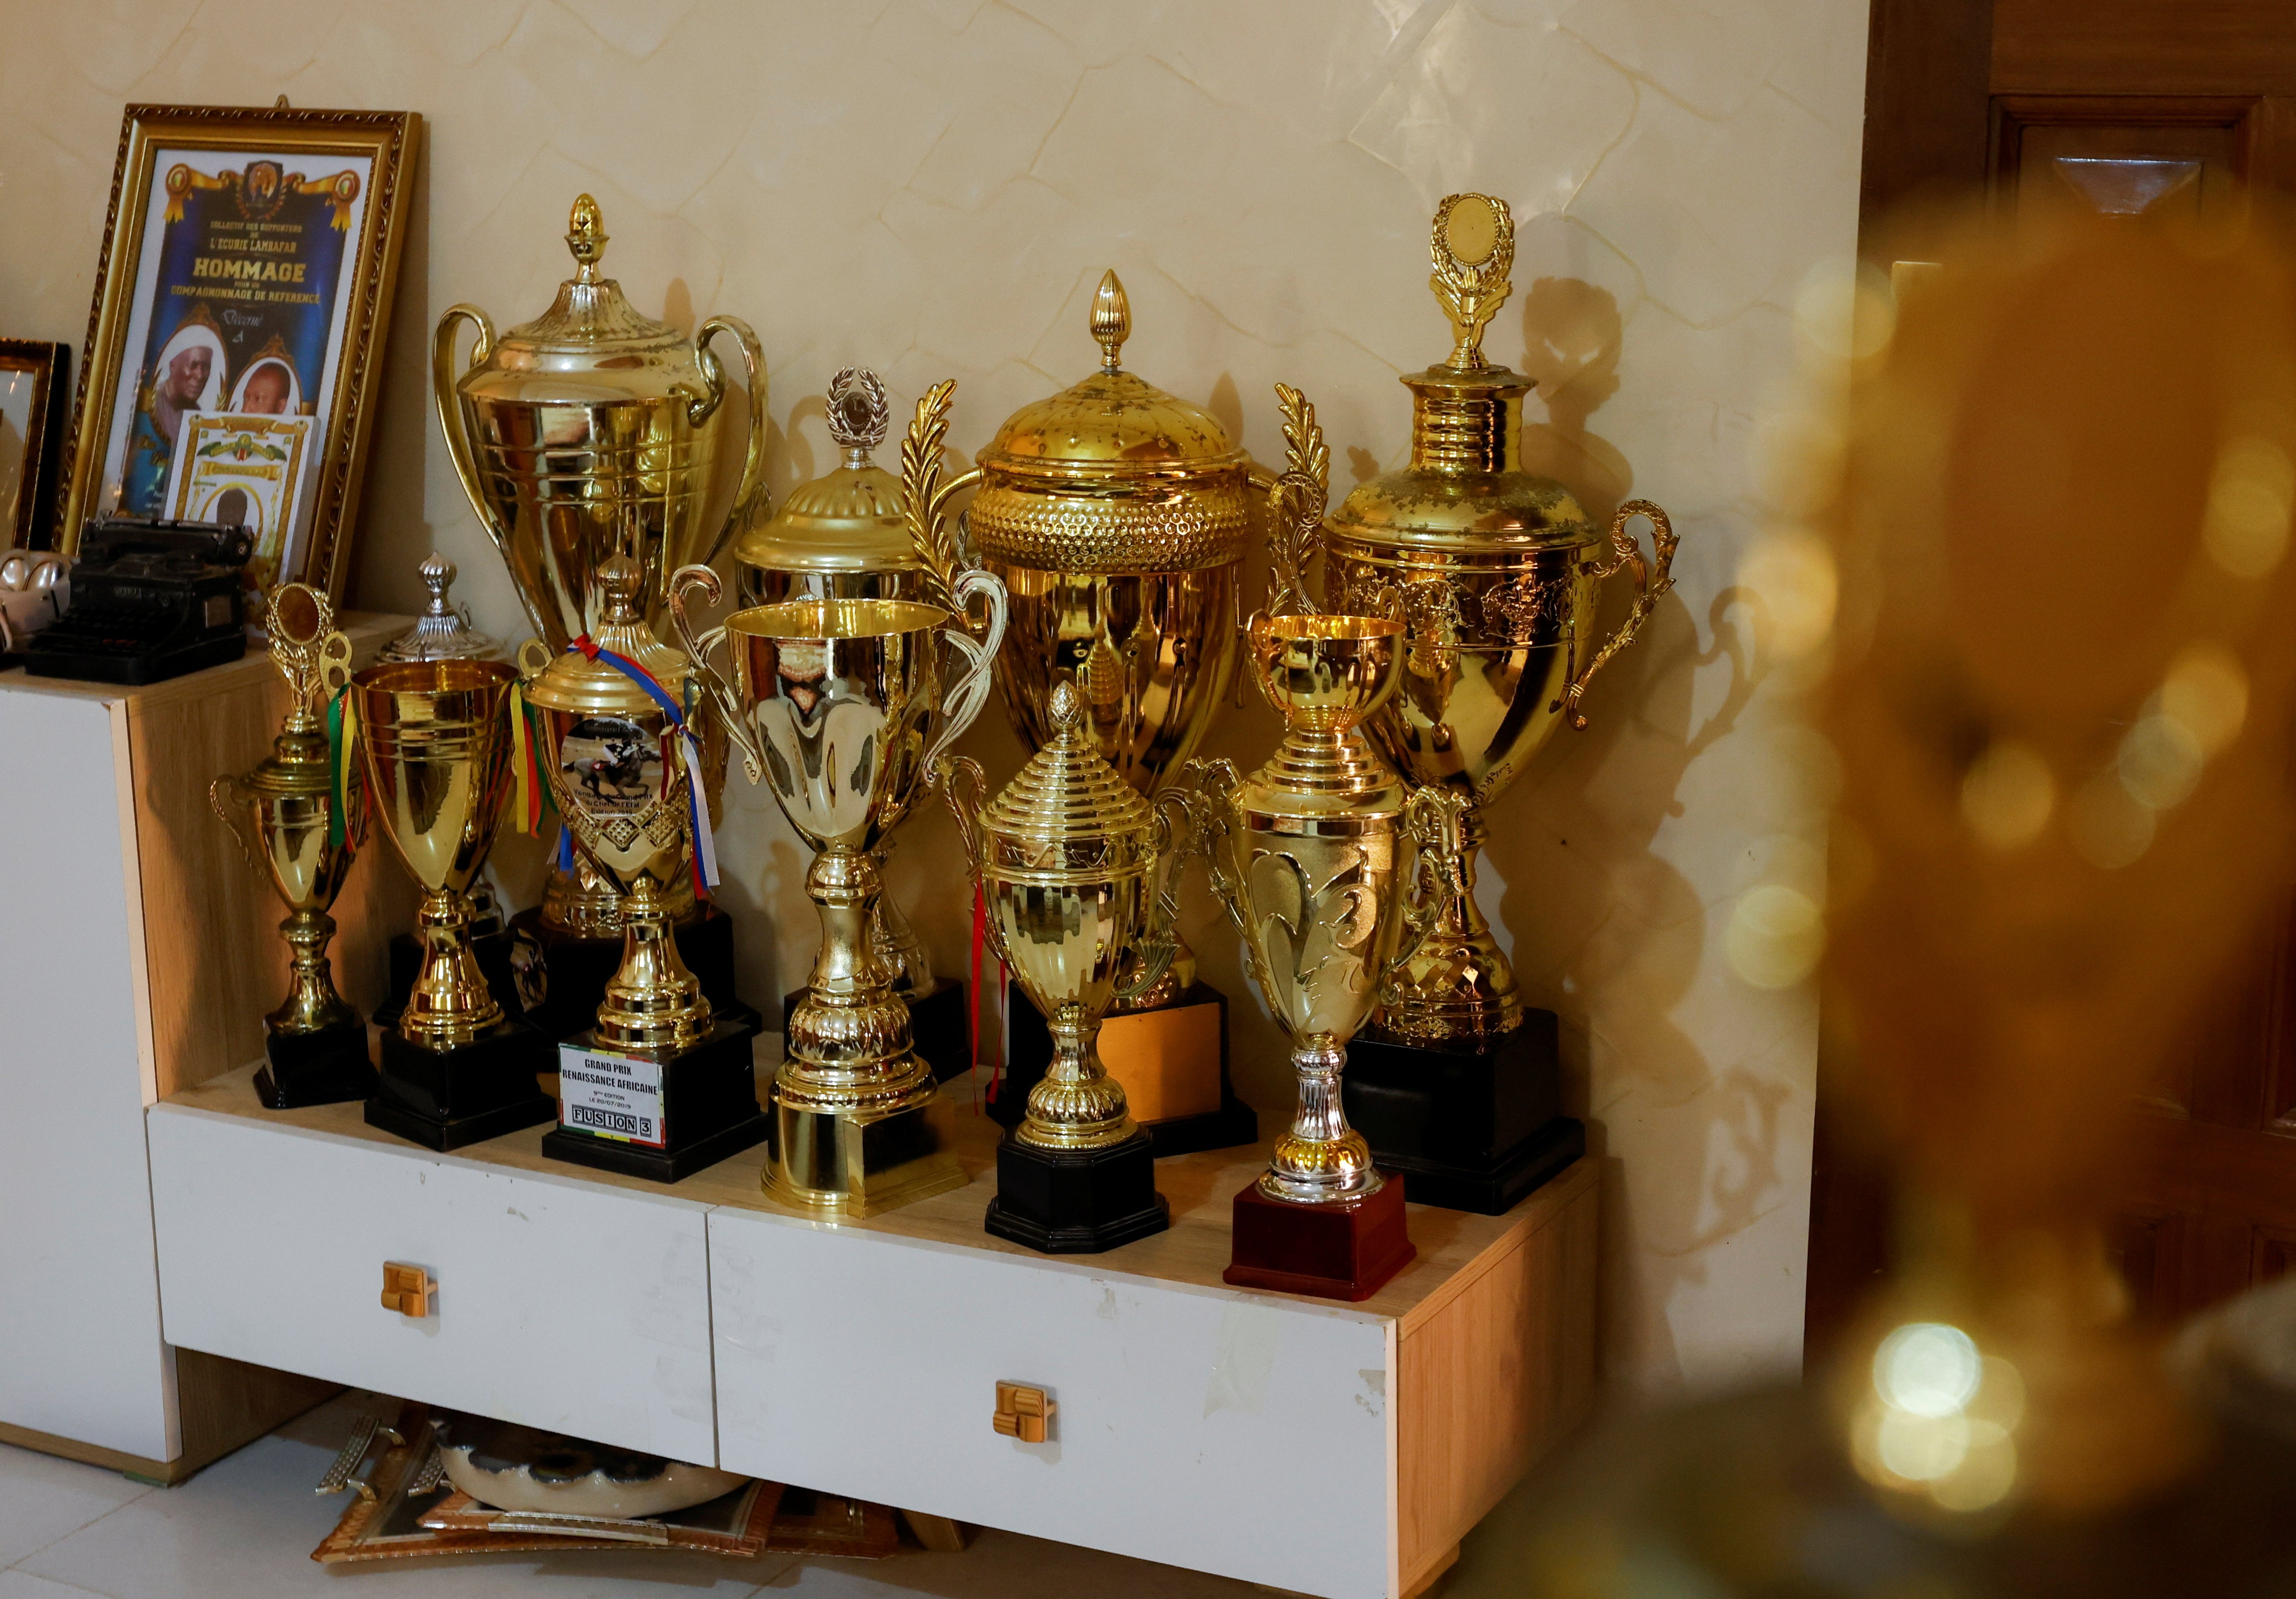 Trophies awarded to Diop are displayed at his coach Bao’s home